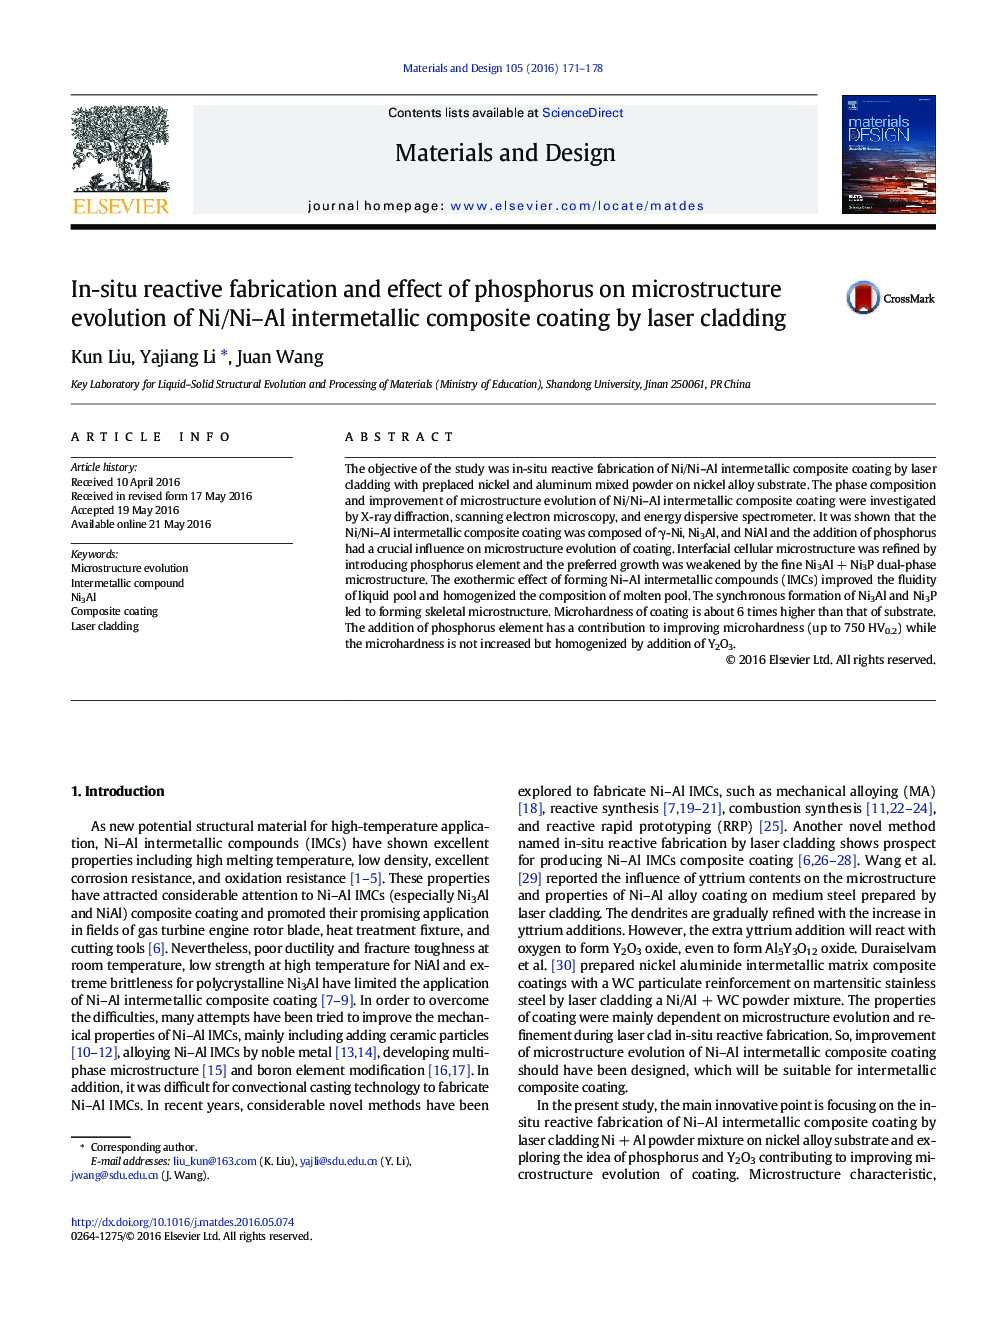 In-situ reactive fabrication and effect of phosphorus on microstructure evolution of Ni/Ni–Al intermetallic composite coating by laser cladding